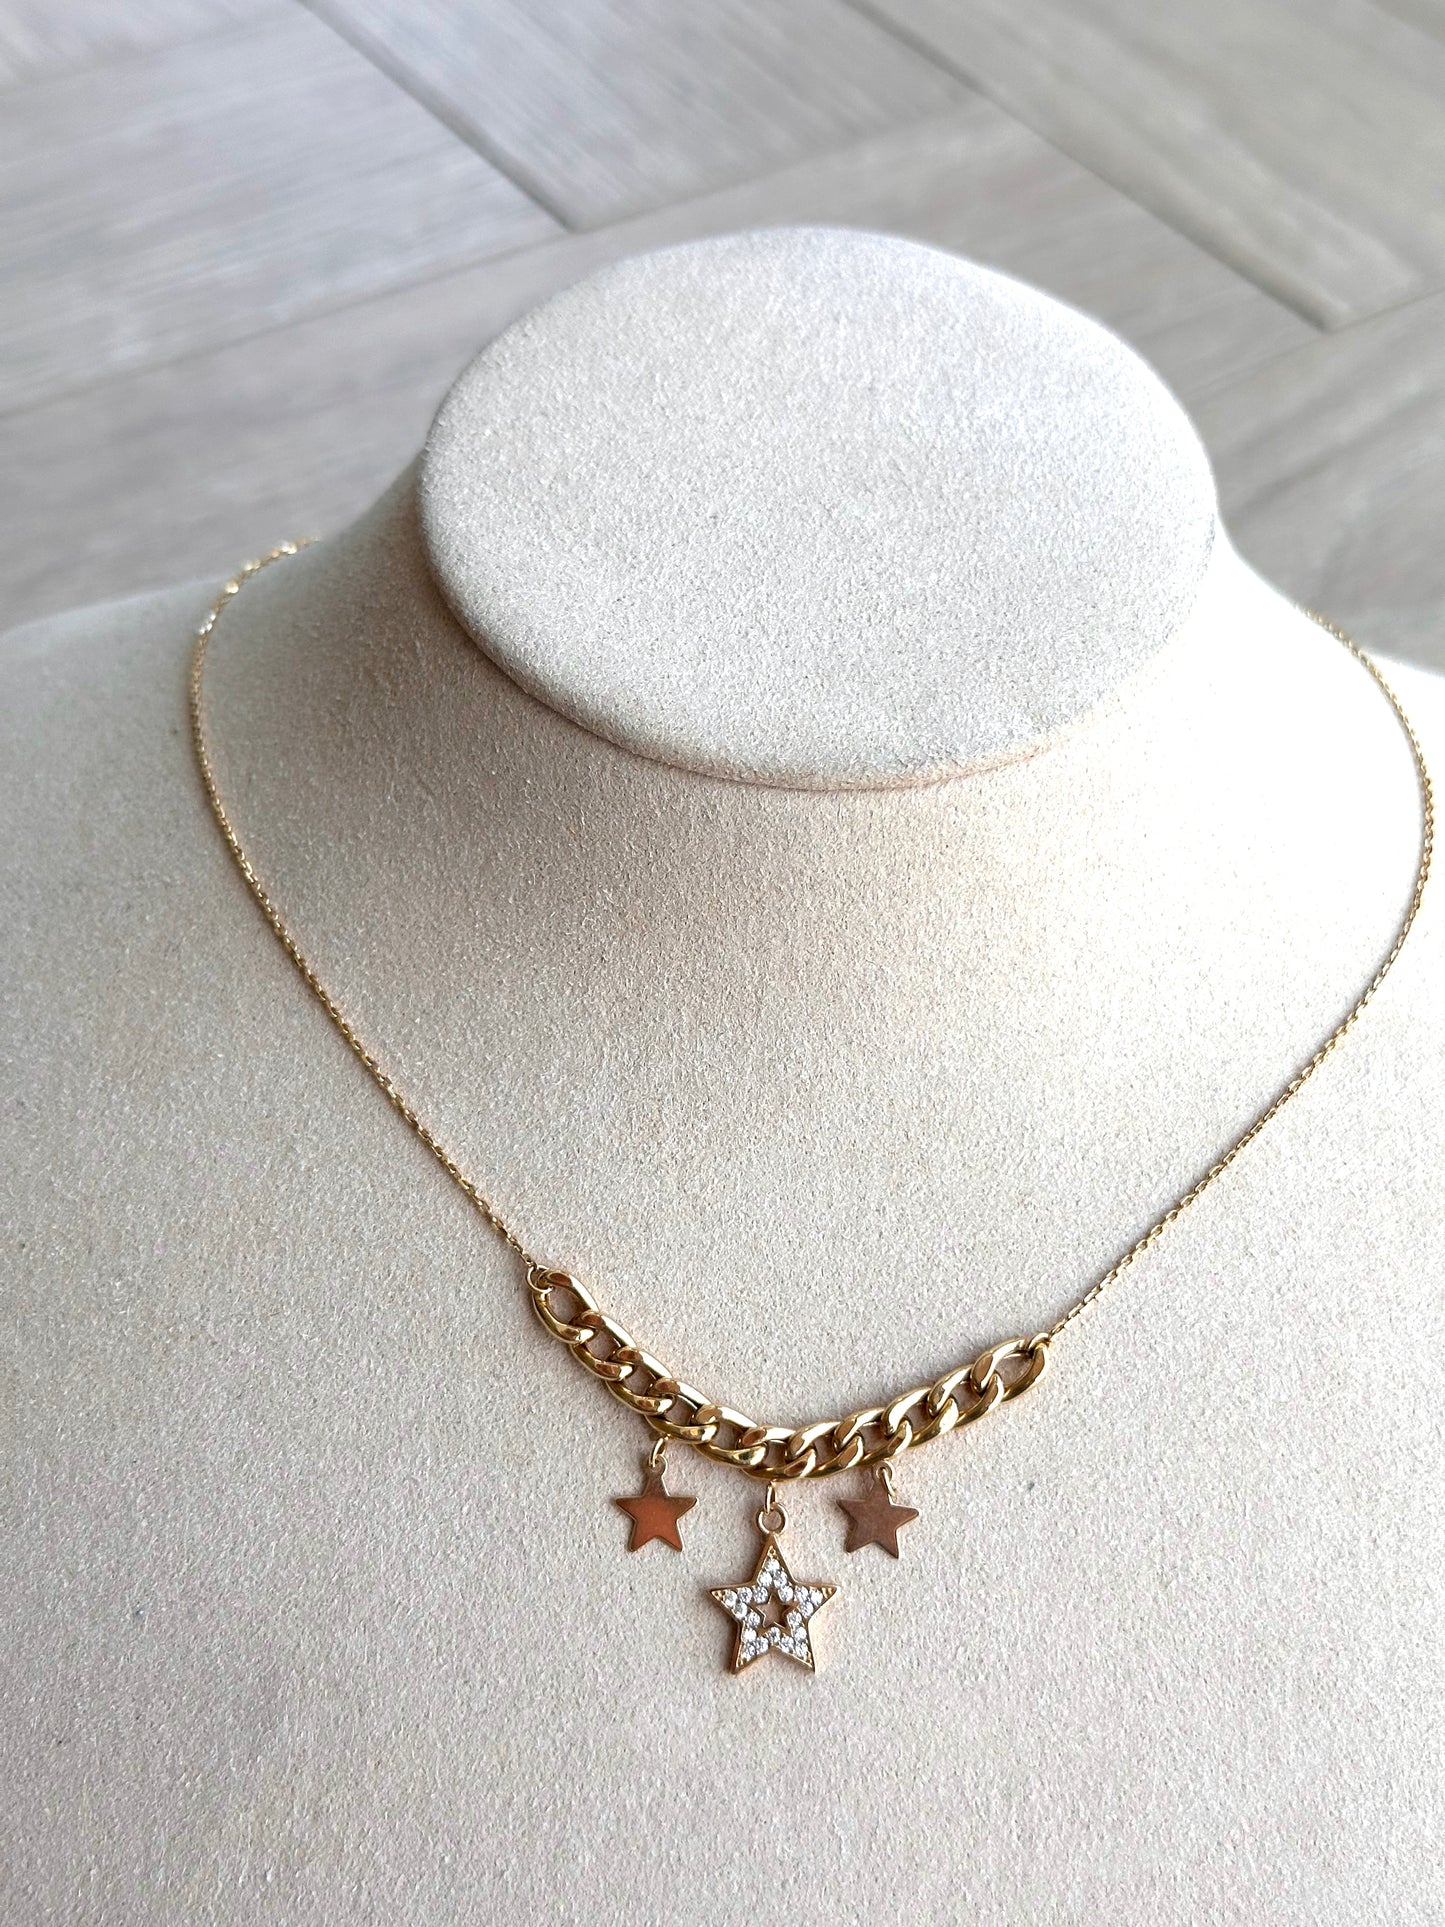 18k Necklace - Star charms